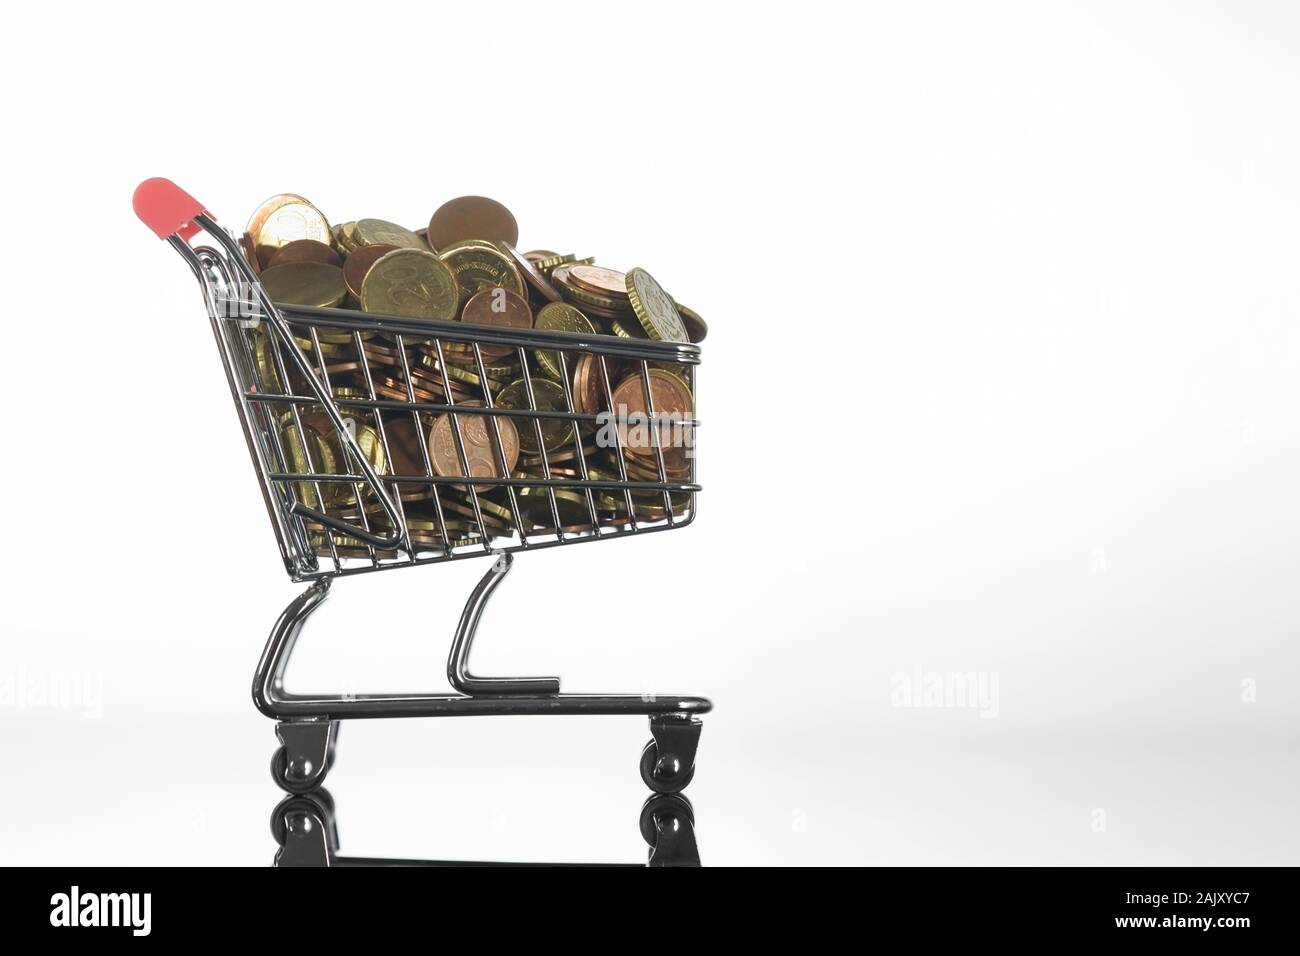 Side View of Tiny Shopping Trolley Full of Euro Coins on Reflective Surface Stock Photo